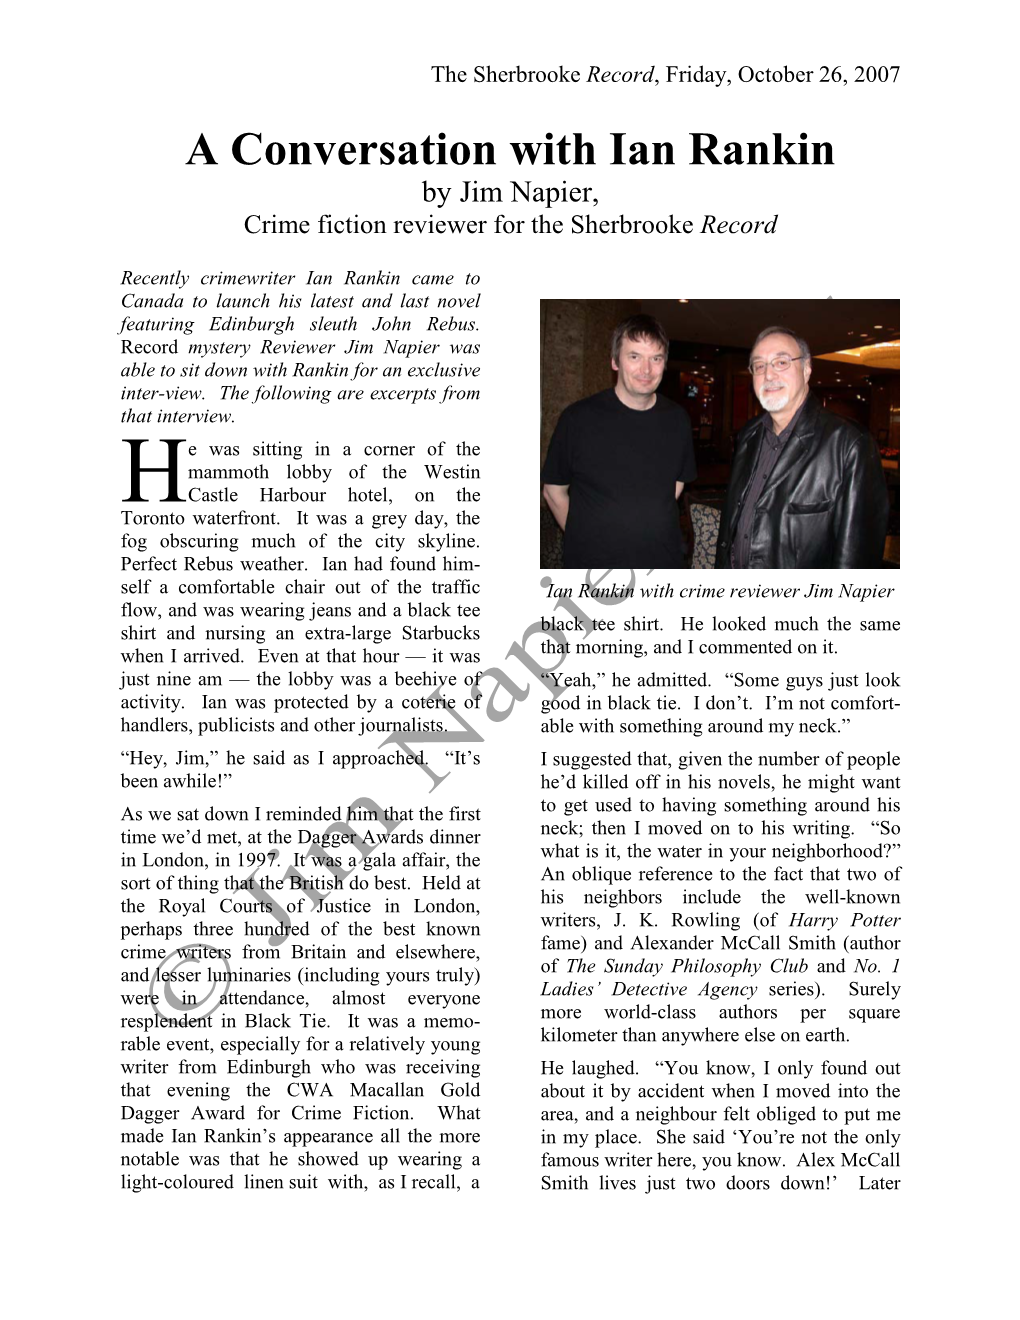 A Conversation with Ian Rankin by Jim Napier, Crime Fiction Reviewer for the Sherbrooke Record